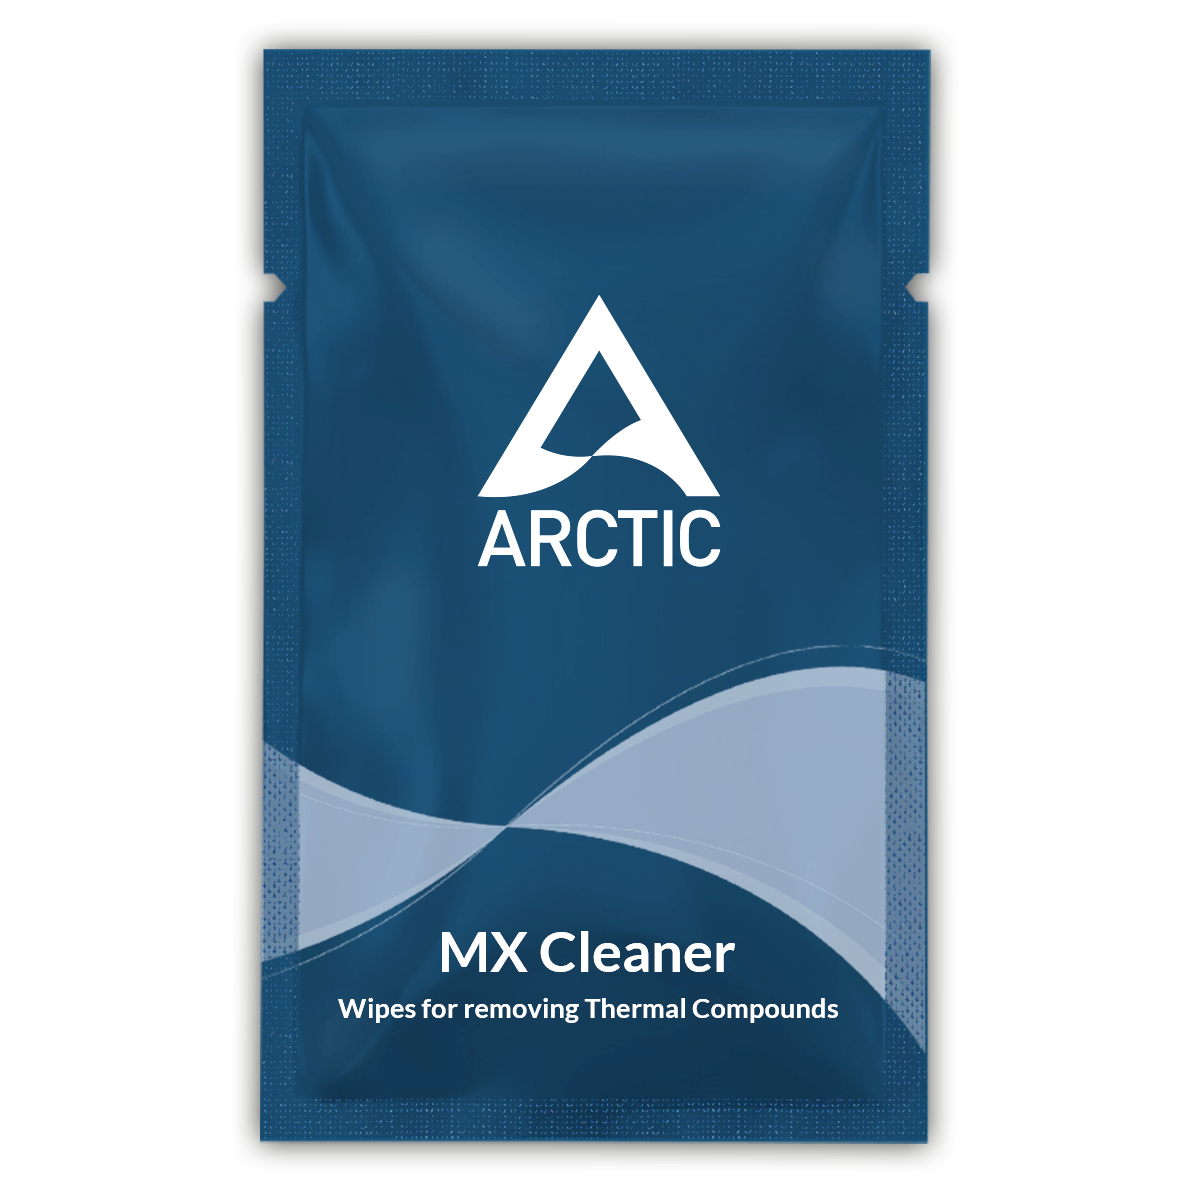 ARCTIC MX CLEANER THERMAL COMPOUND REMOVER ONE BOX (40PCS)